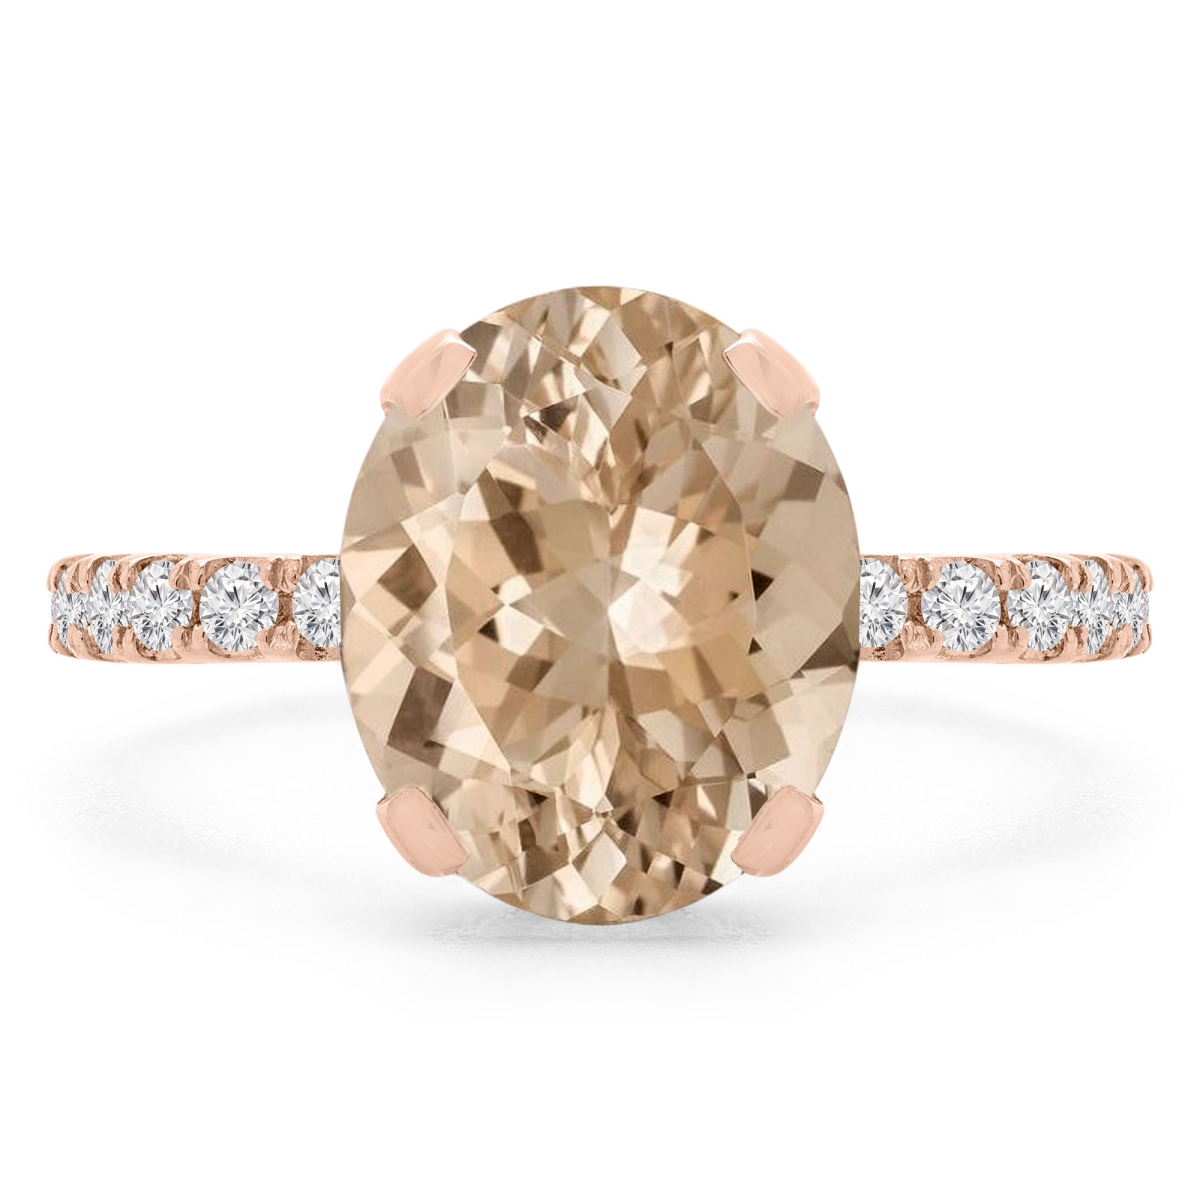 Picture of Majesty Diamonds MD190407-4.75 3.4 CTW Oval Pink Morganite Under Halo Engagement Ring in 14K Rose Gold - Size 4.75